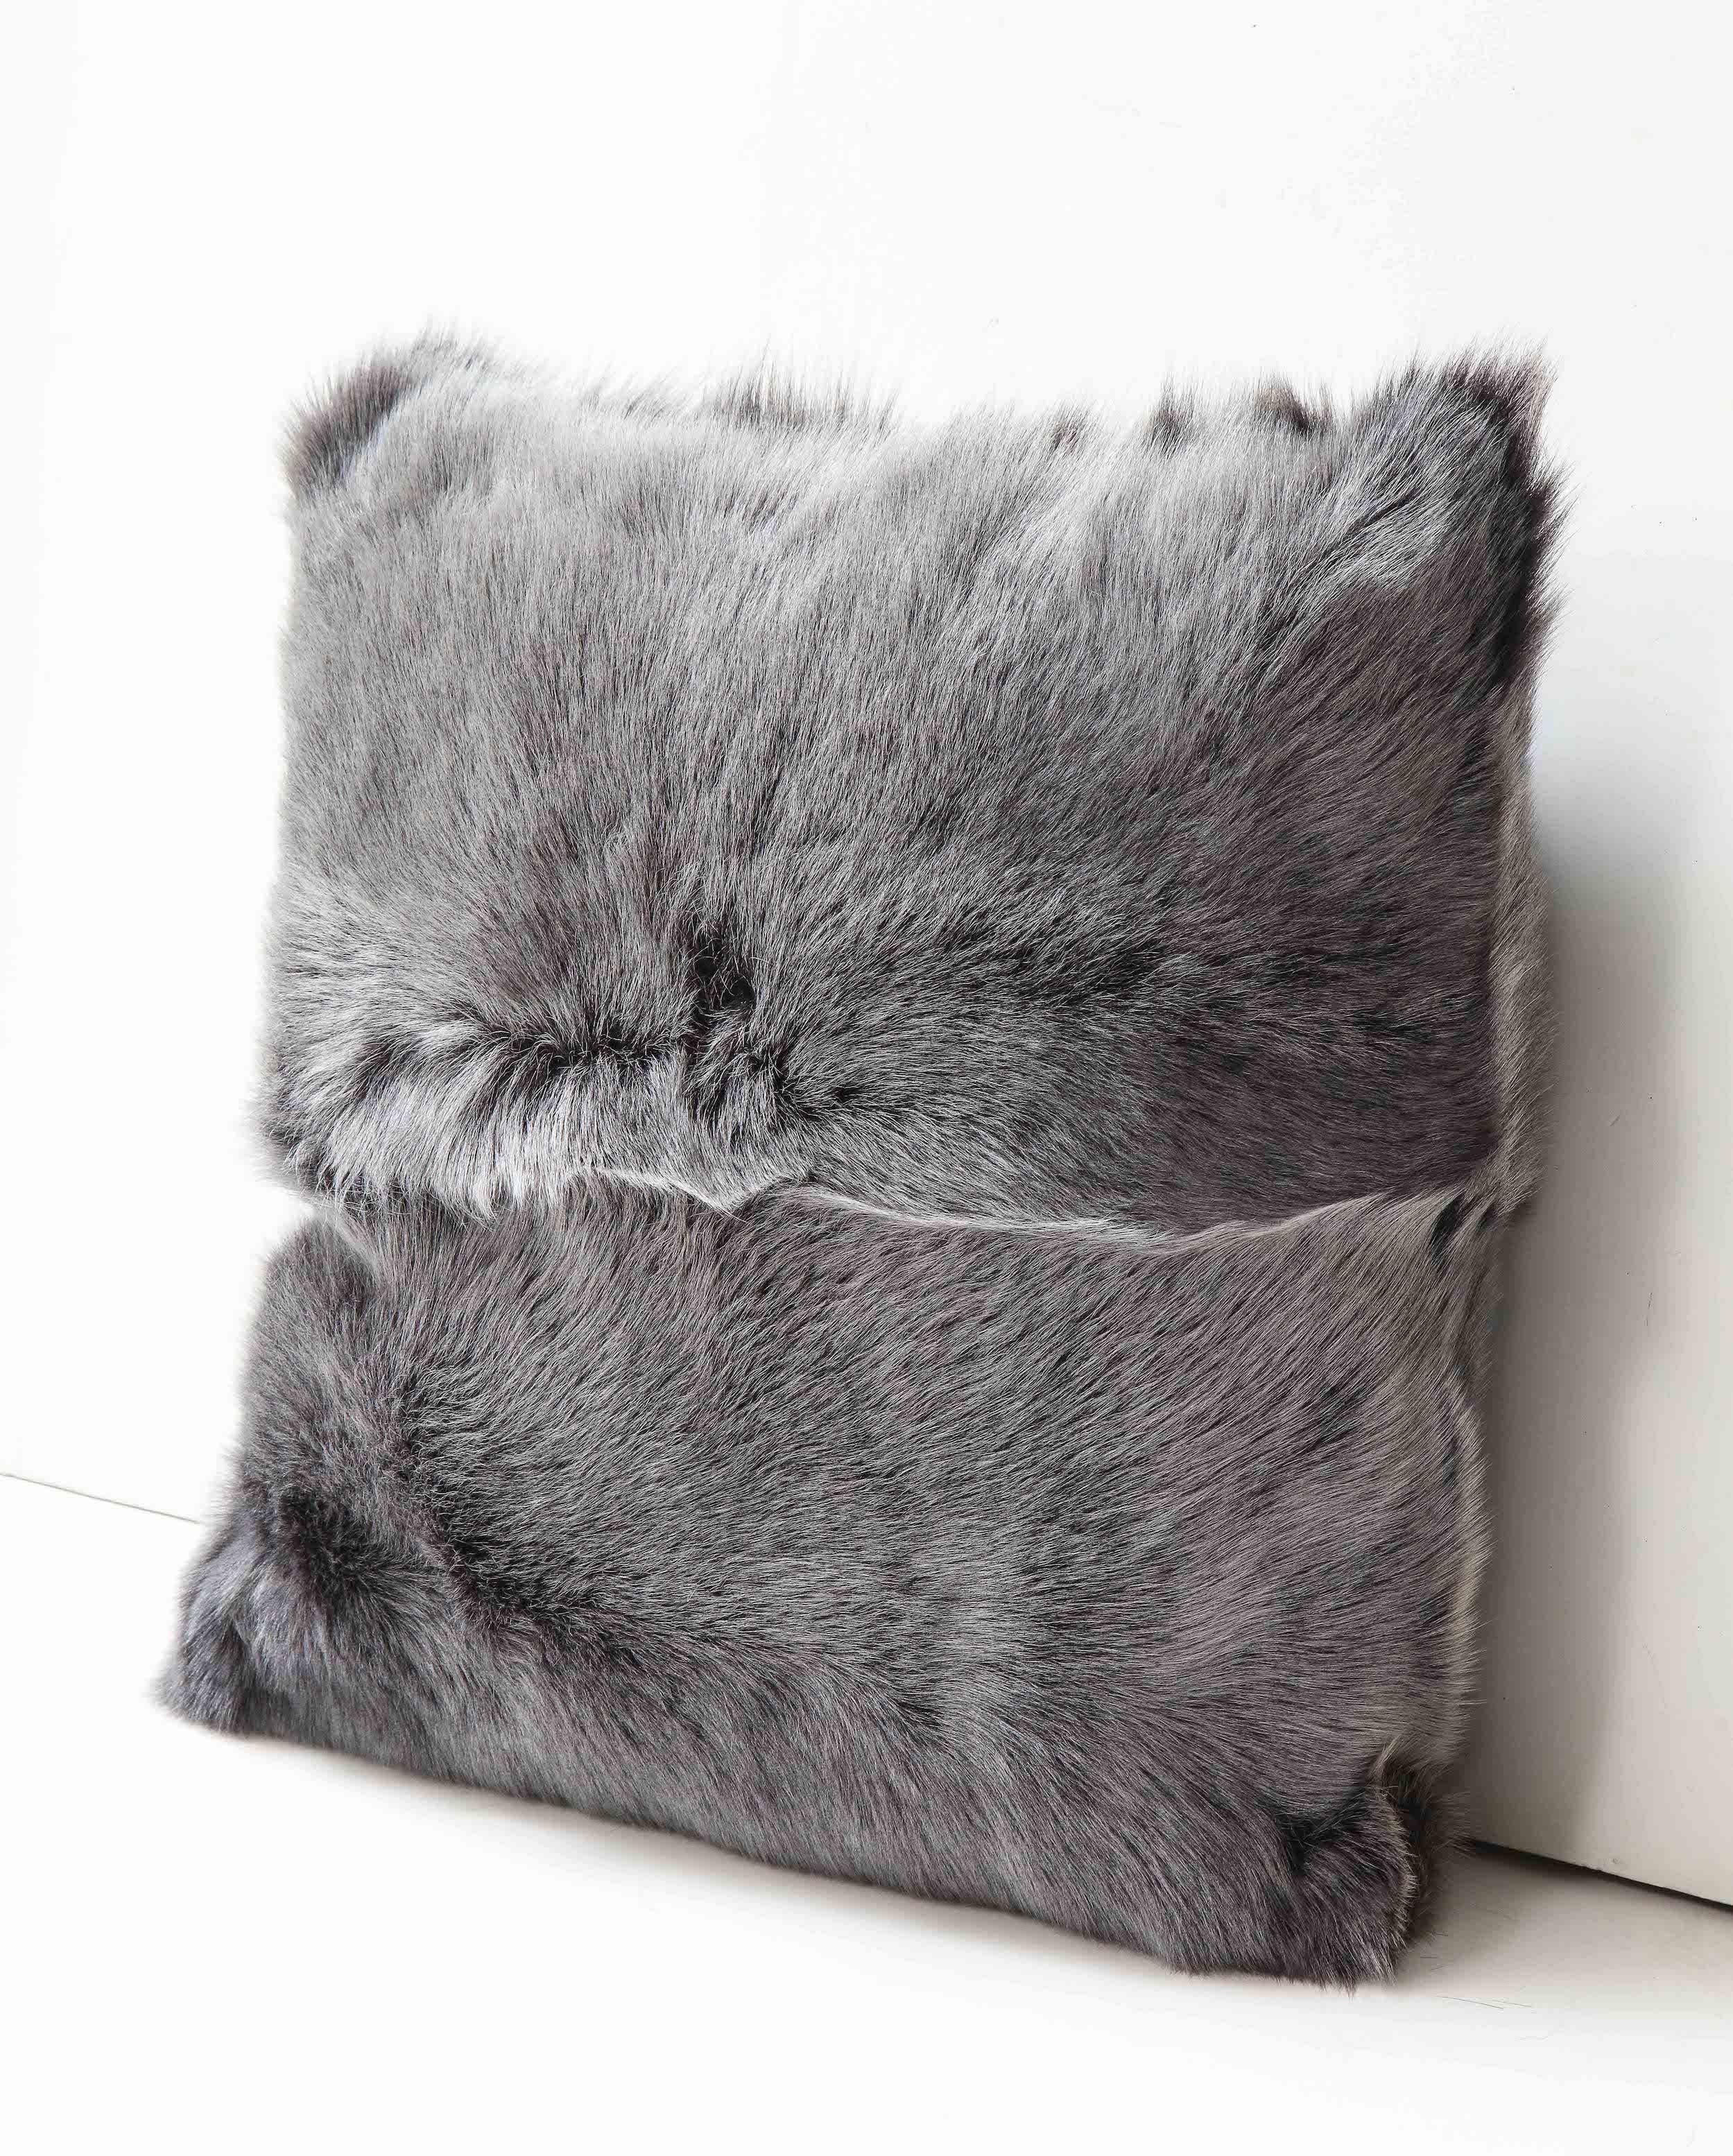 Beautiful custom double sided long hair Toscana shearling pillow in grey color. Very elegant in look and tangibly luxurious. It is made of genuine shearing with a zipper enclosure in a matching color, filled with down and feather, and 18